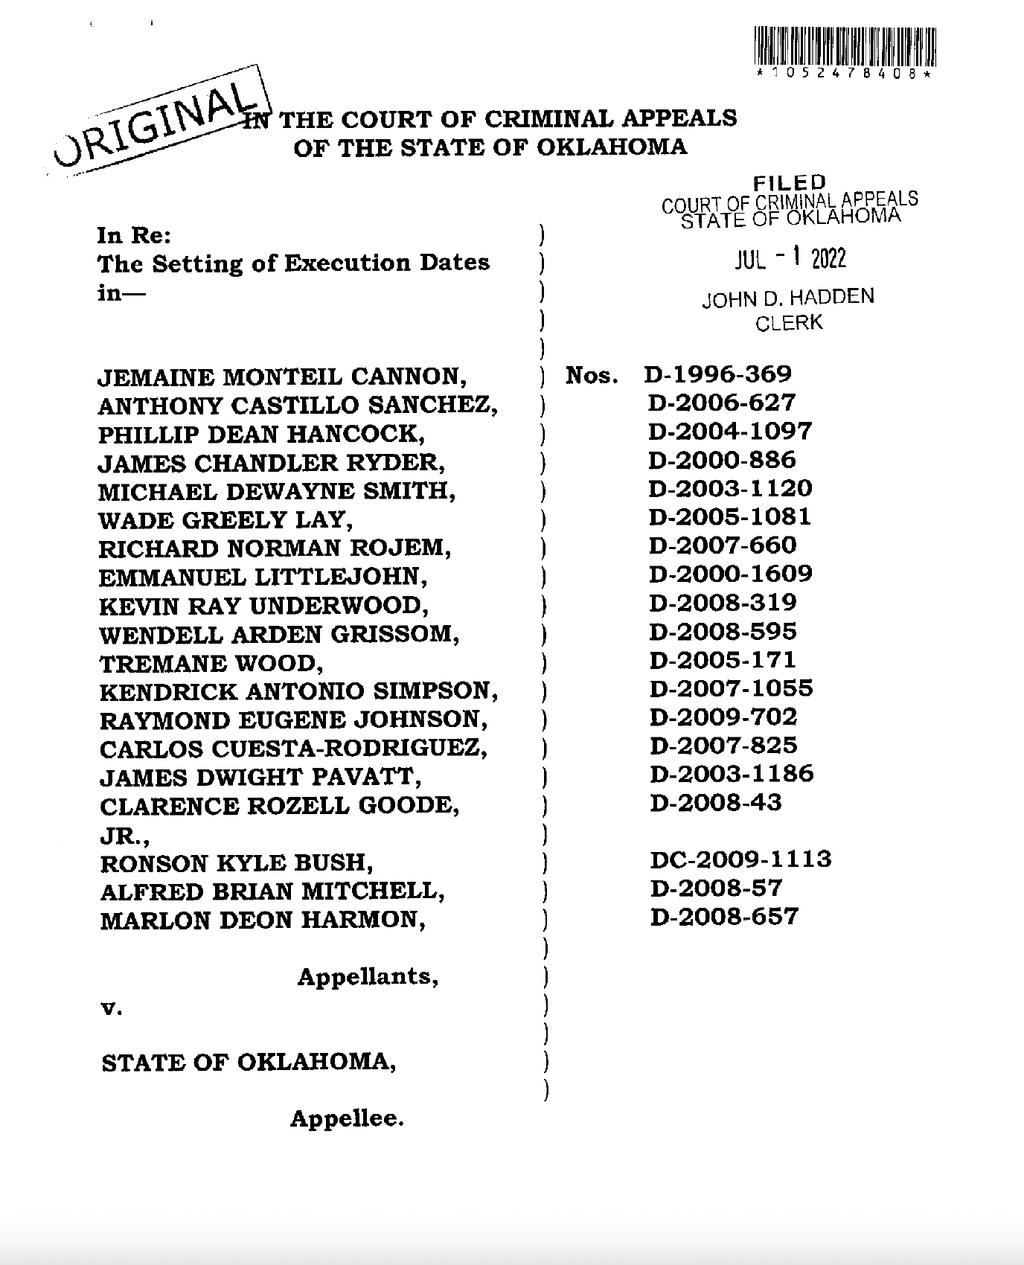 Oklahoma Court Schedules 25 Executions Between August 2022 and December 2024